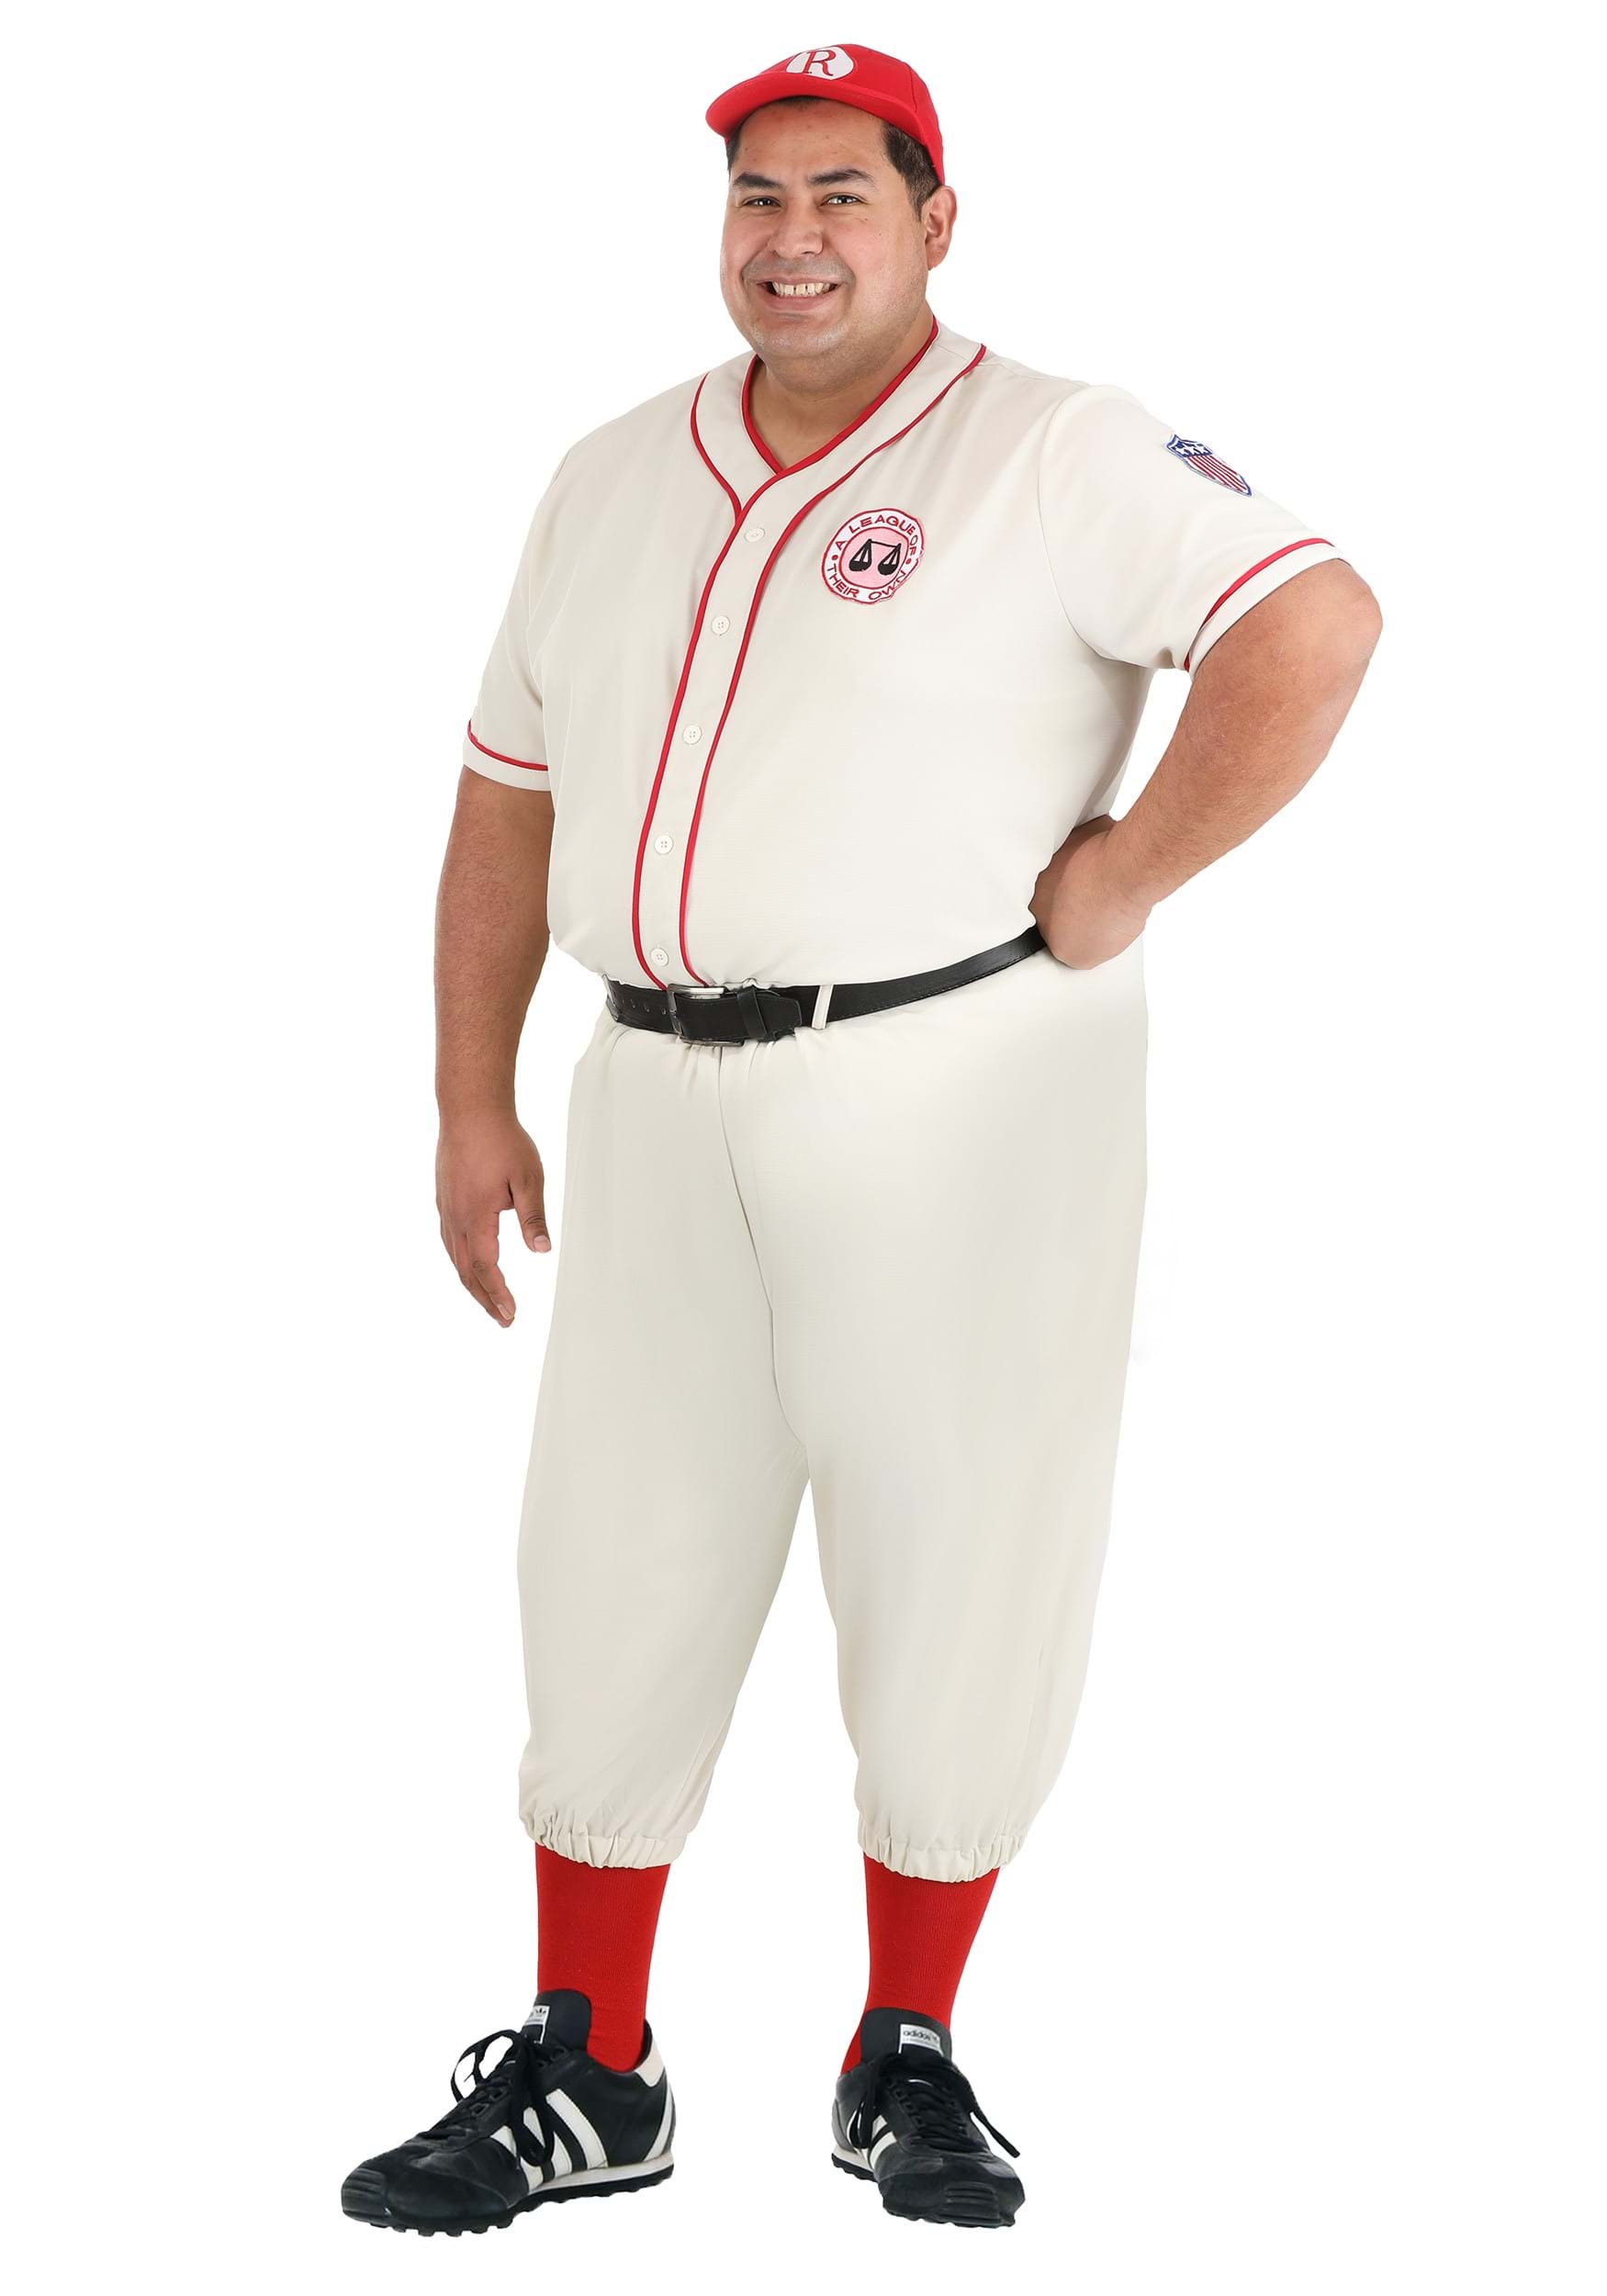 Plus Size Coach Jimmy Fancy Dress Costume From A League Of Their Own , Exclusive